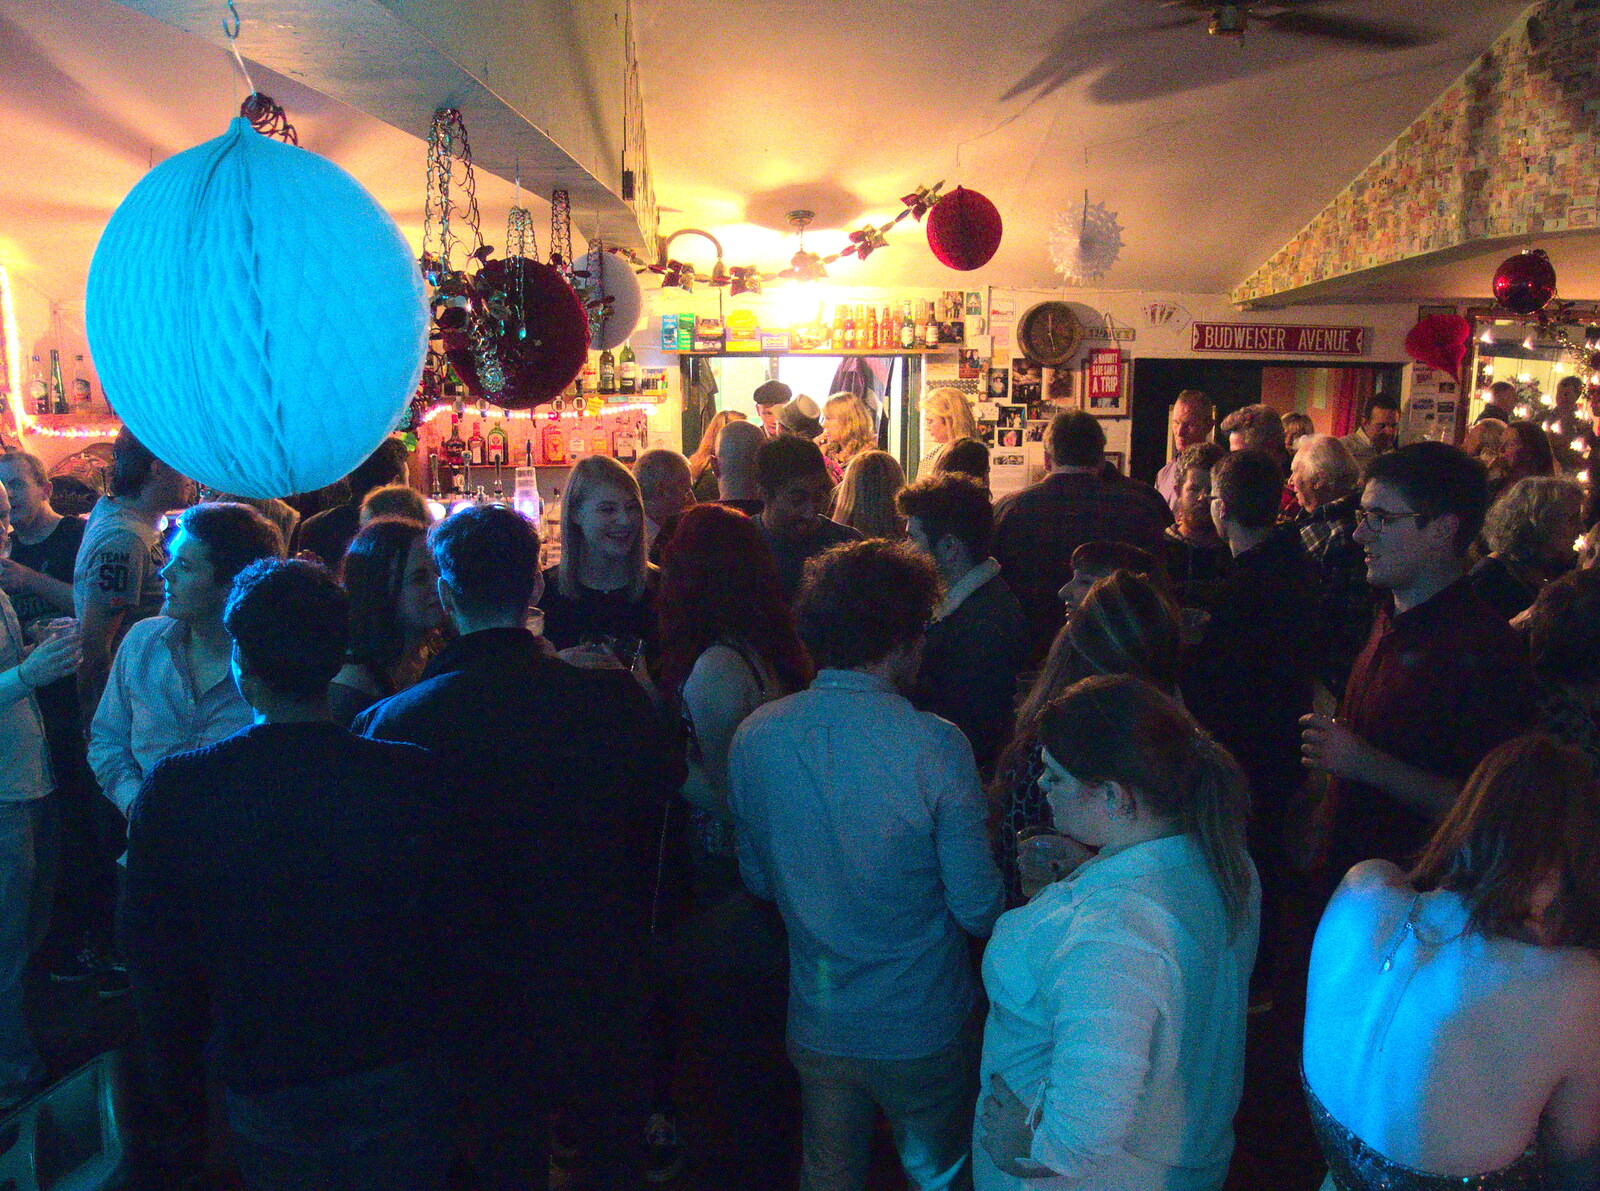 The crowds in the barrel from New Year's Eve With The BBs, The Barrel, Banham, Norfolk - 31st December 2015